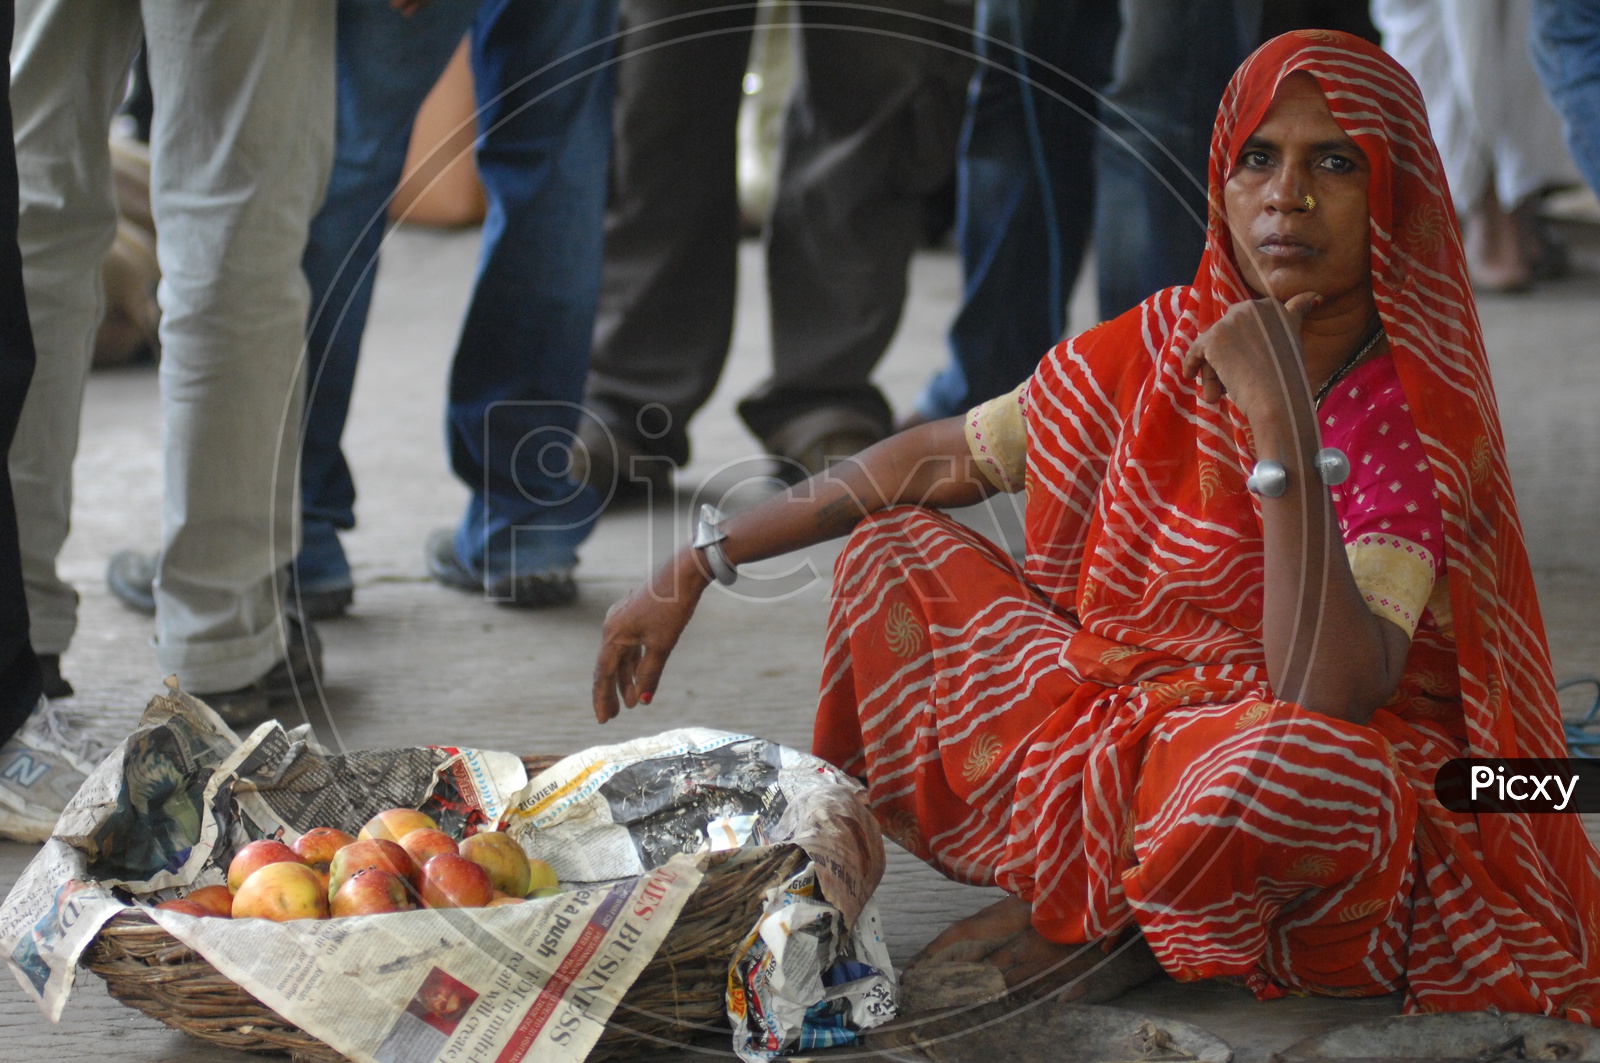 Photograph of a women selling fruits / People Face